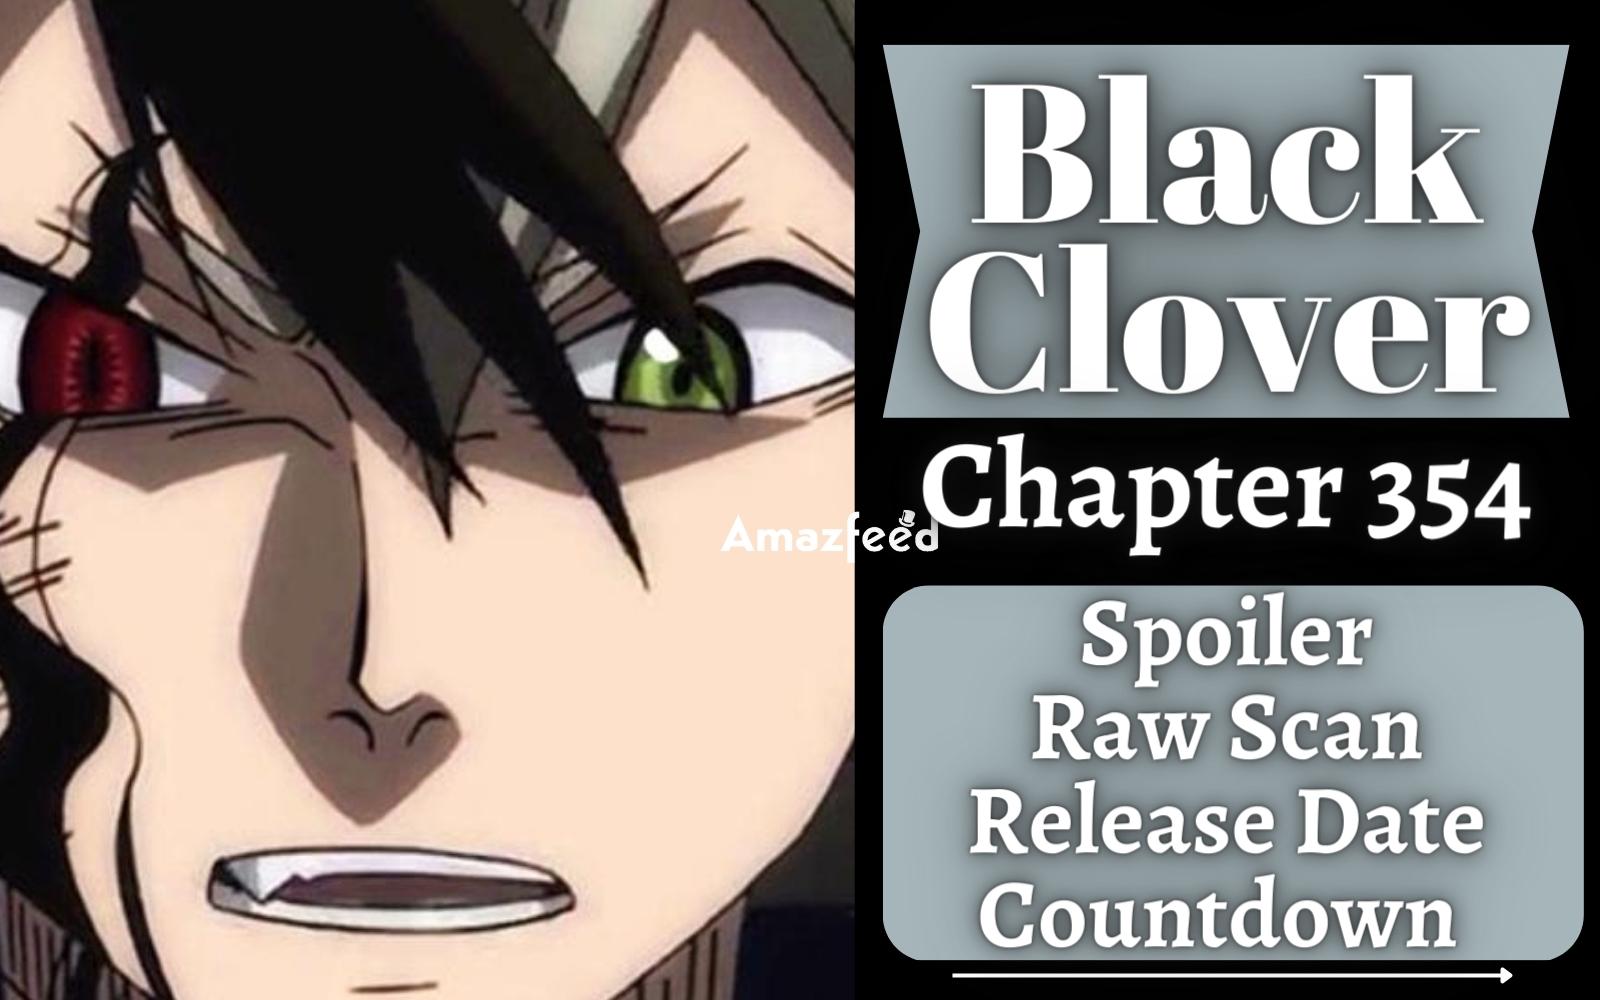 Black Clover Chapter 354 Spoiler, Plot, Raw Scan, Color Page, and Release  Date » Amazfeed